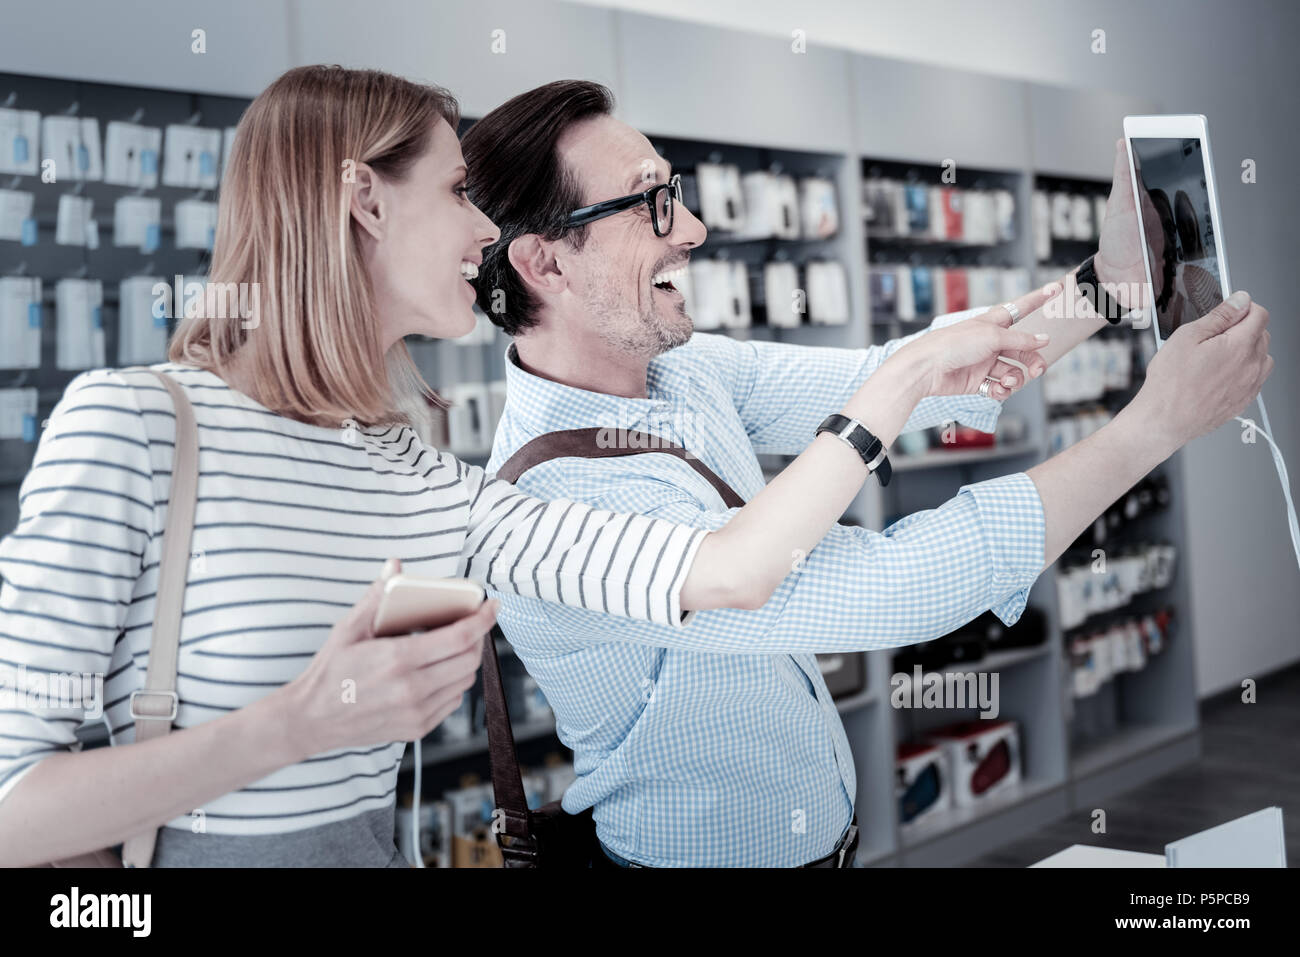 Cute funny people taking a photo in a store Stock Photo